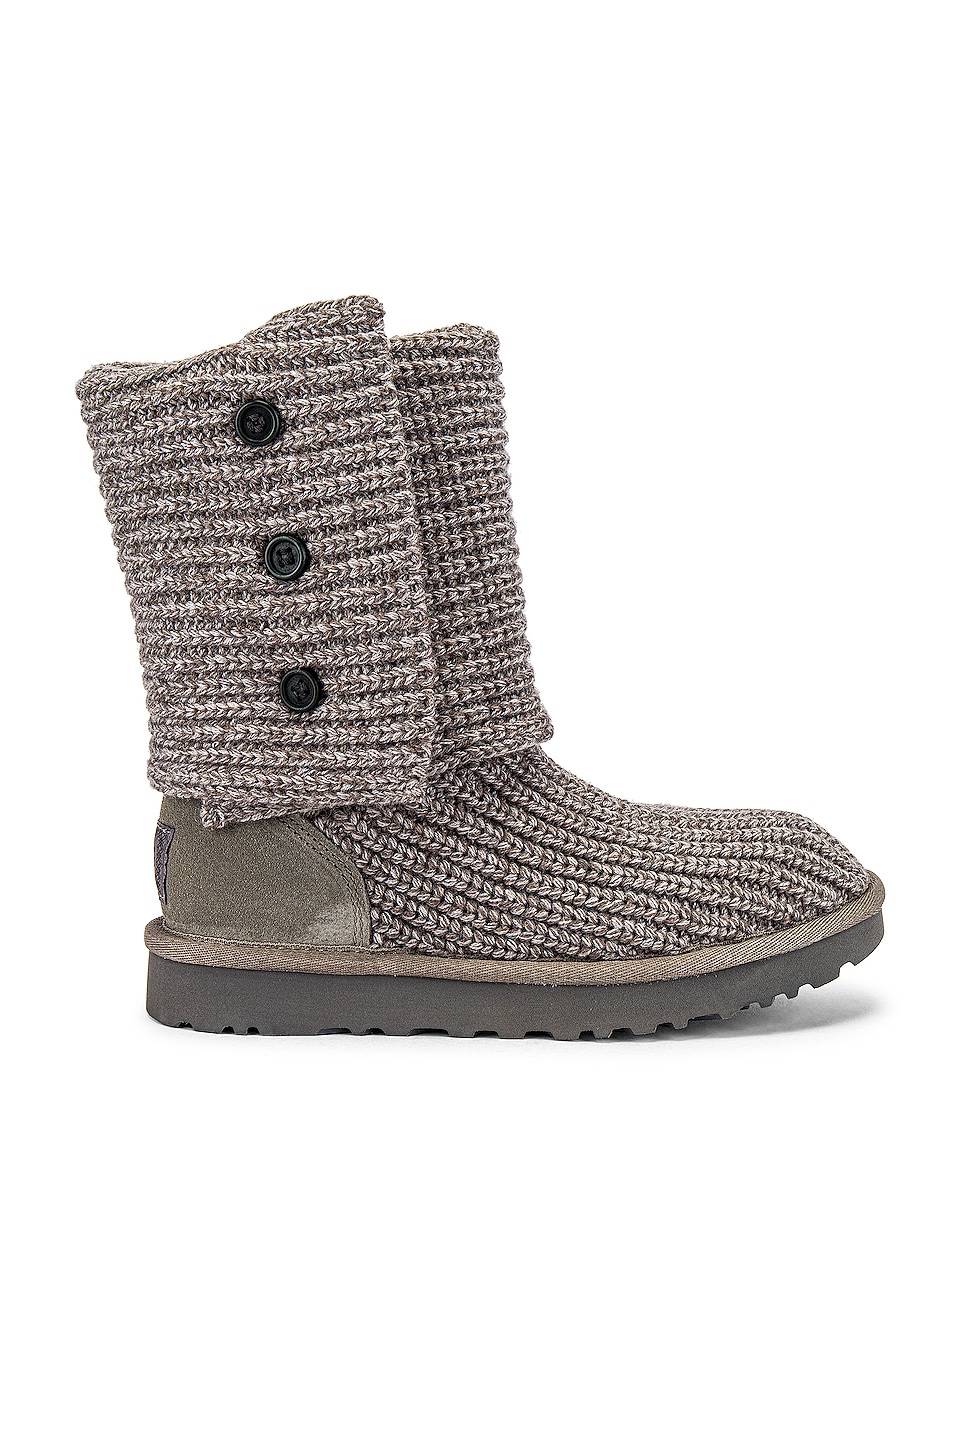 classic cardy boot